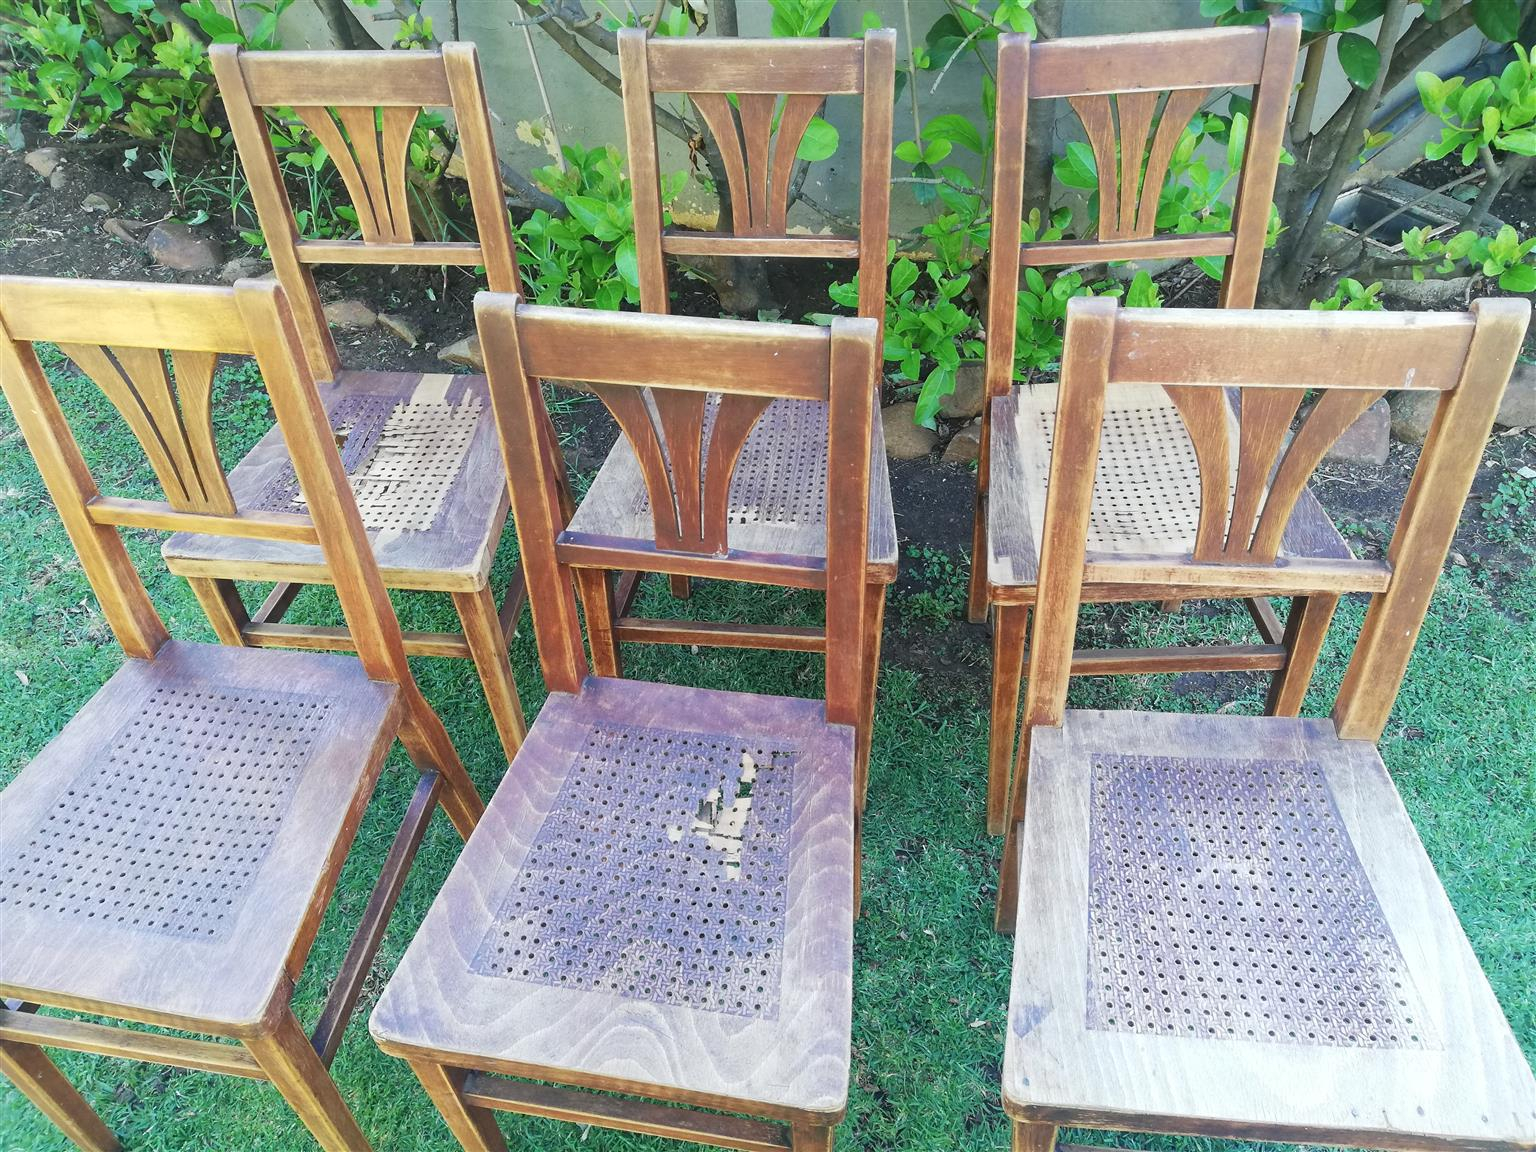 Second Hand Dining Room Chairs For Sale Johannesburg